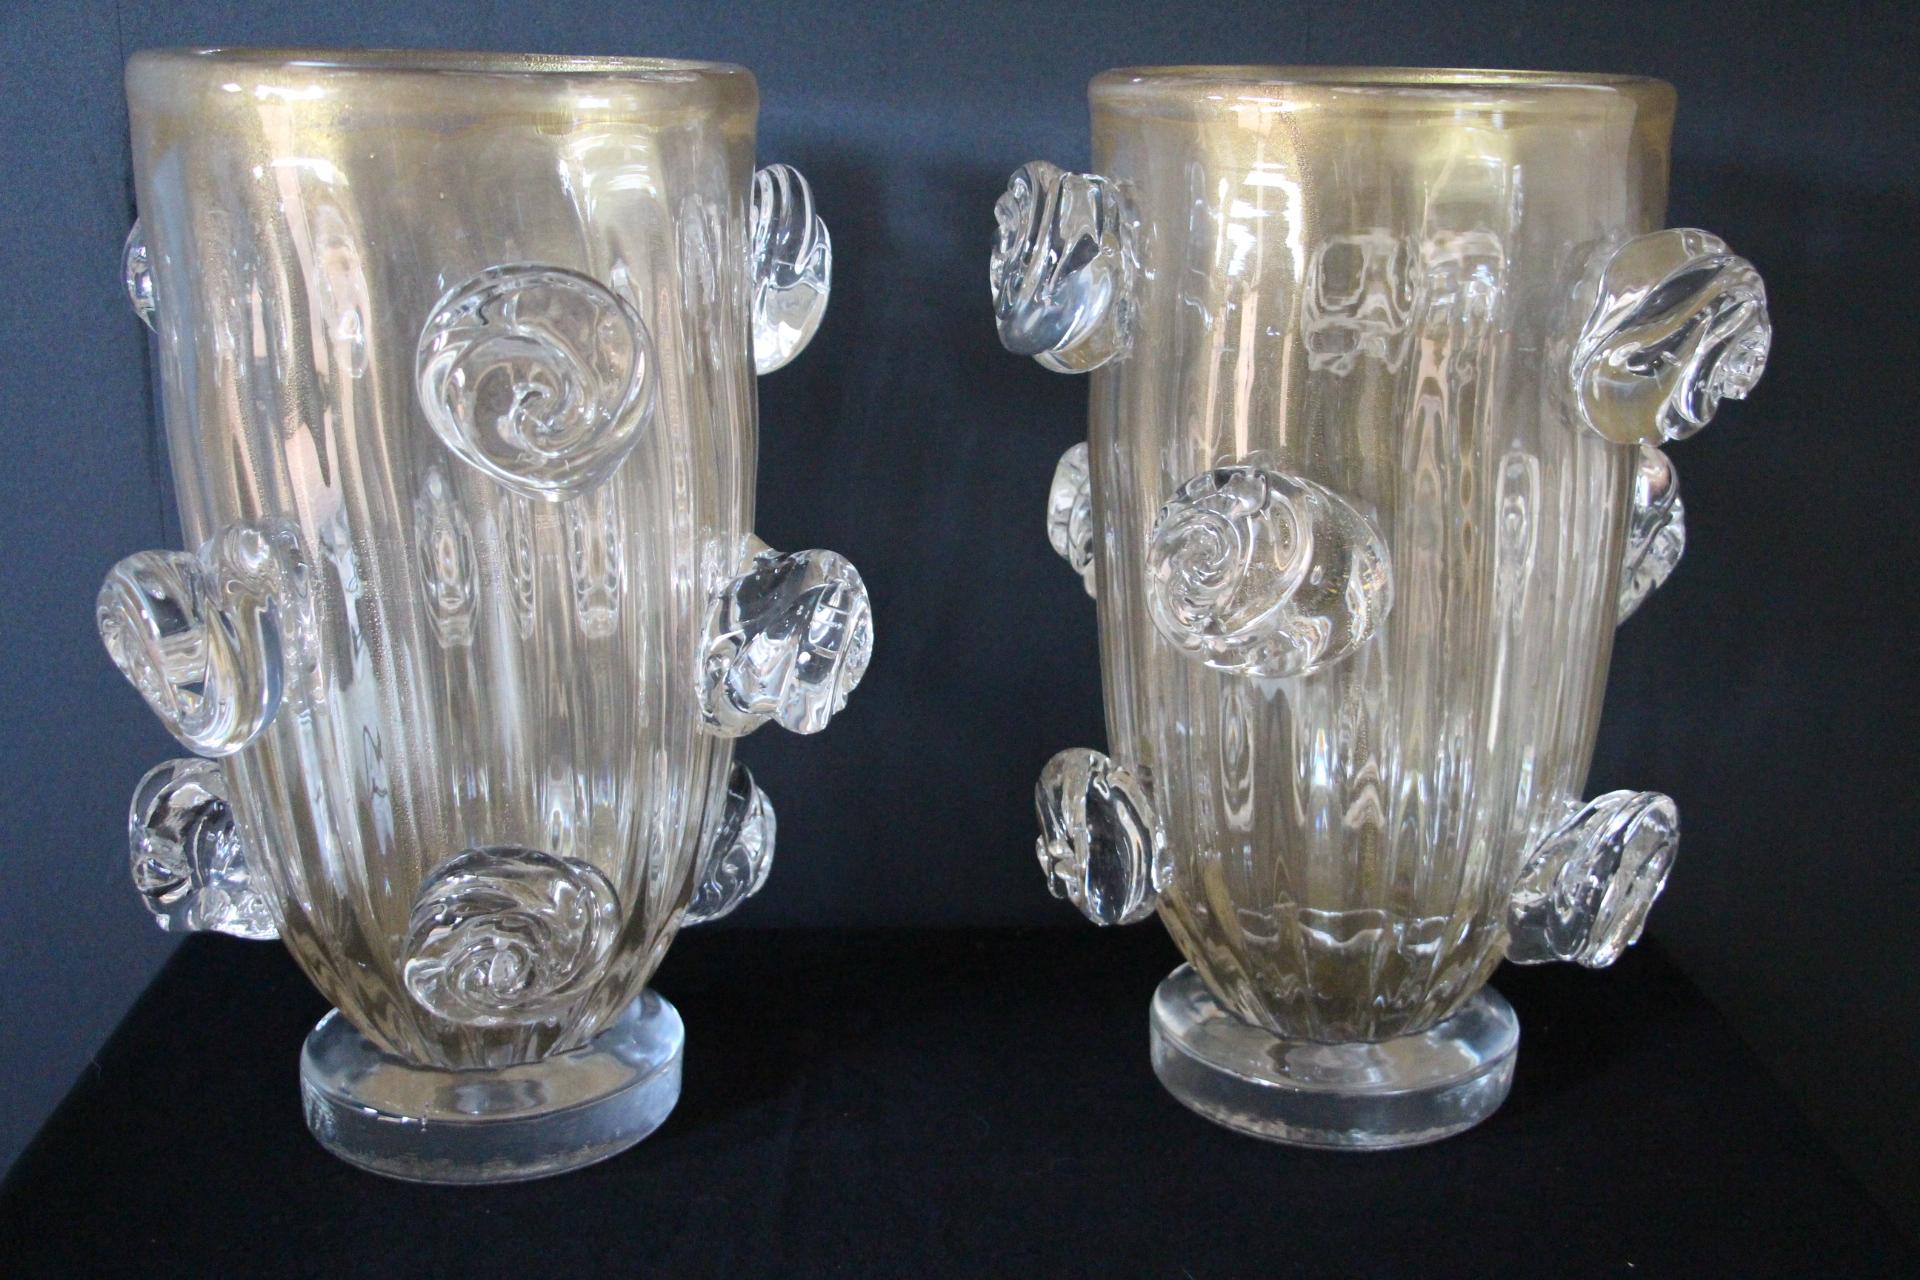 Pair of Large Golden Murano Glass Vases With Roses Decor by Costantini For Sale 12